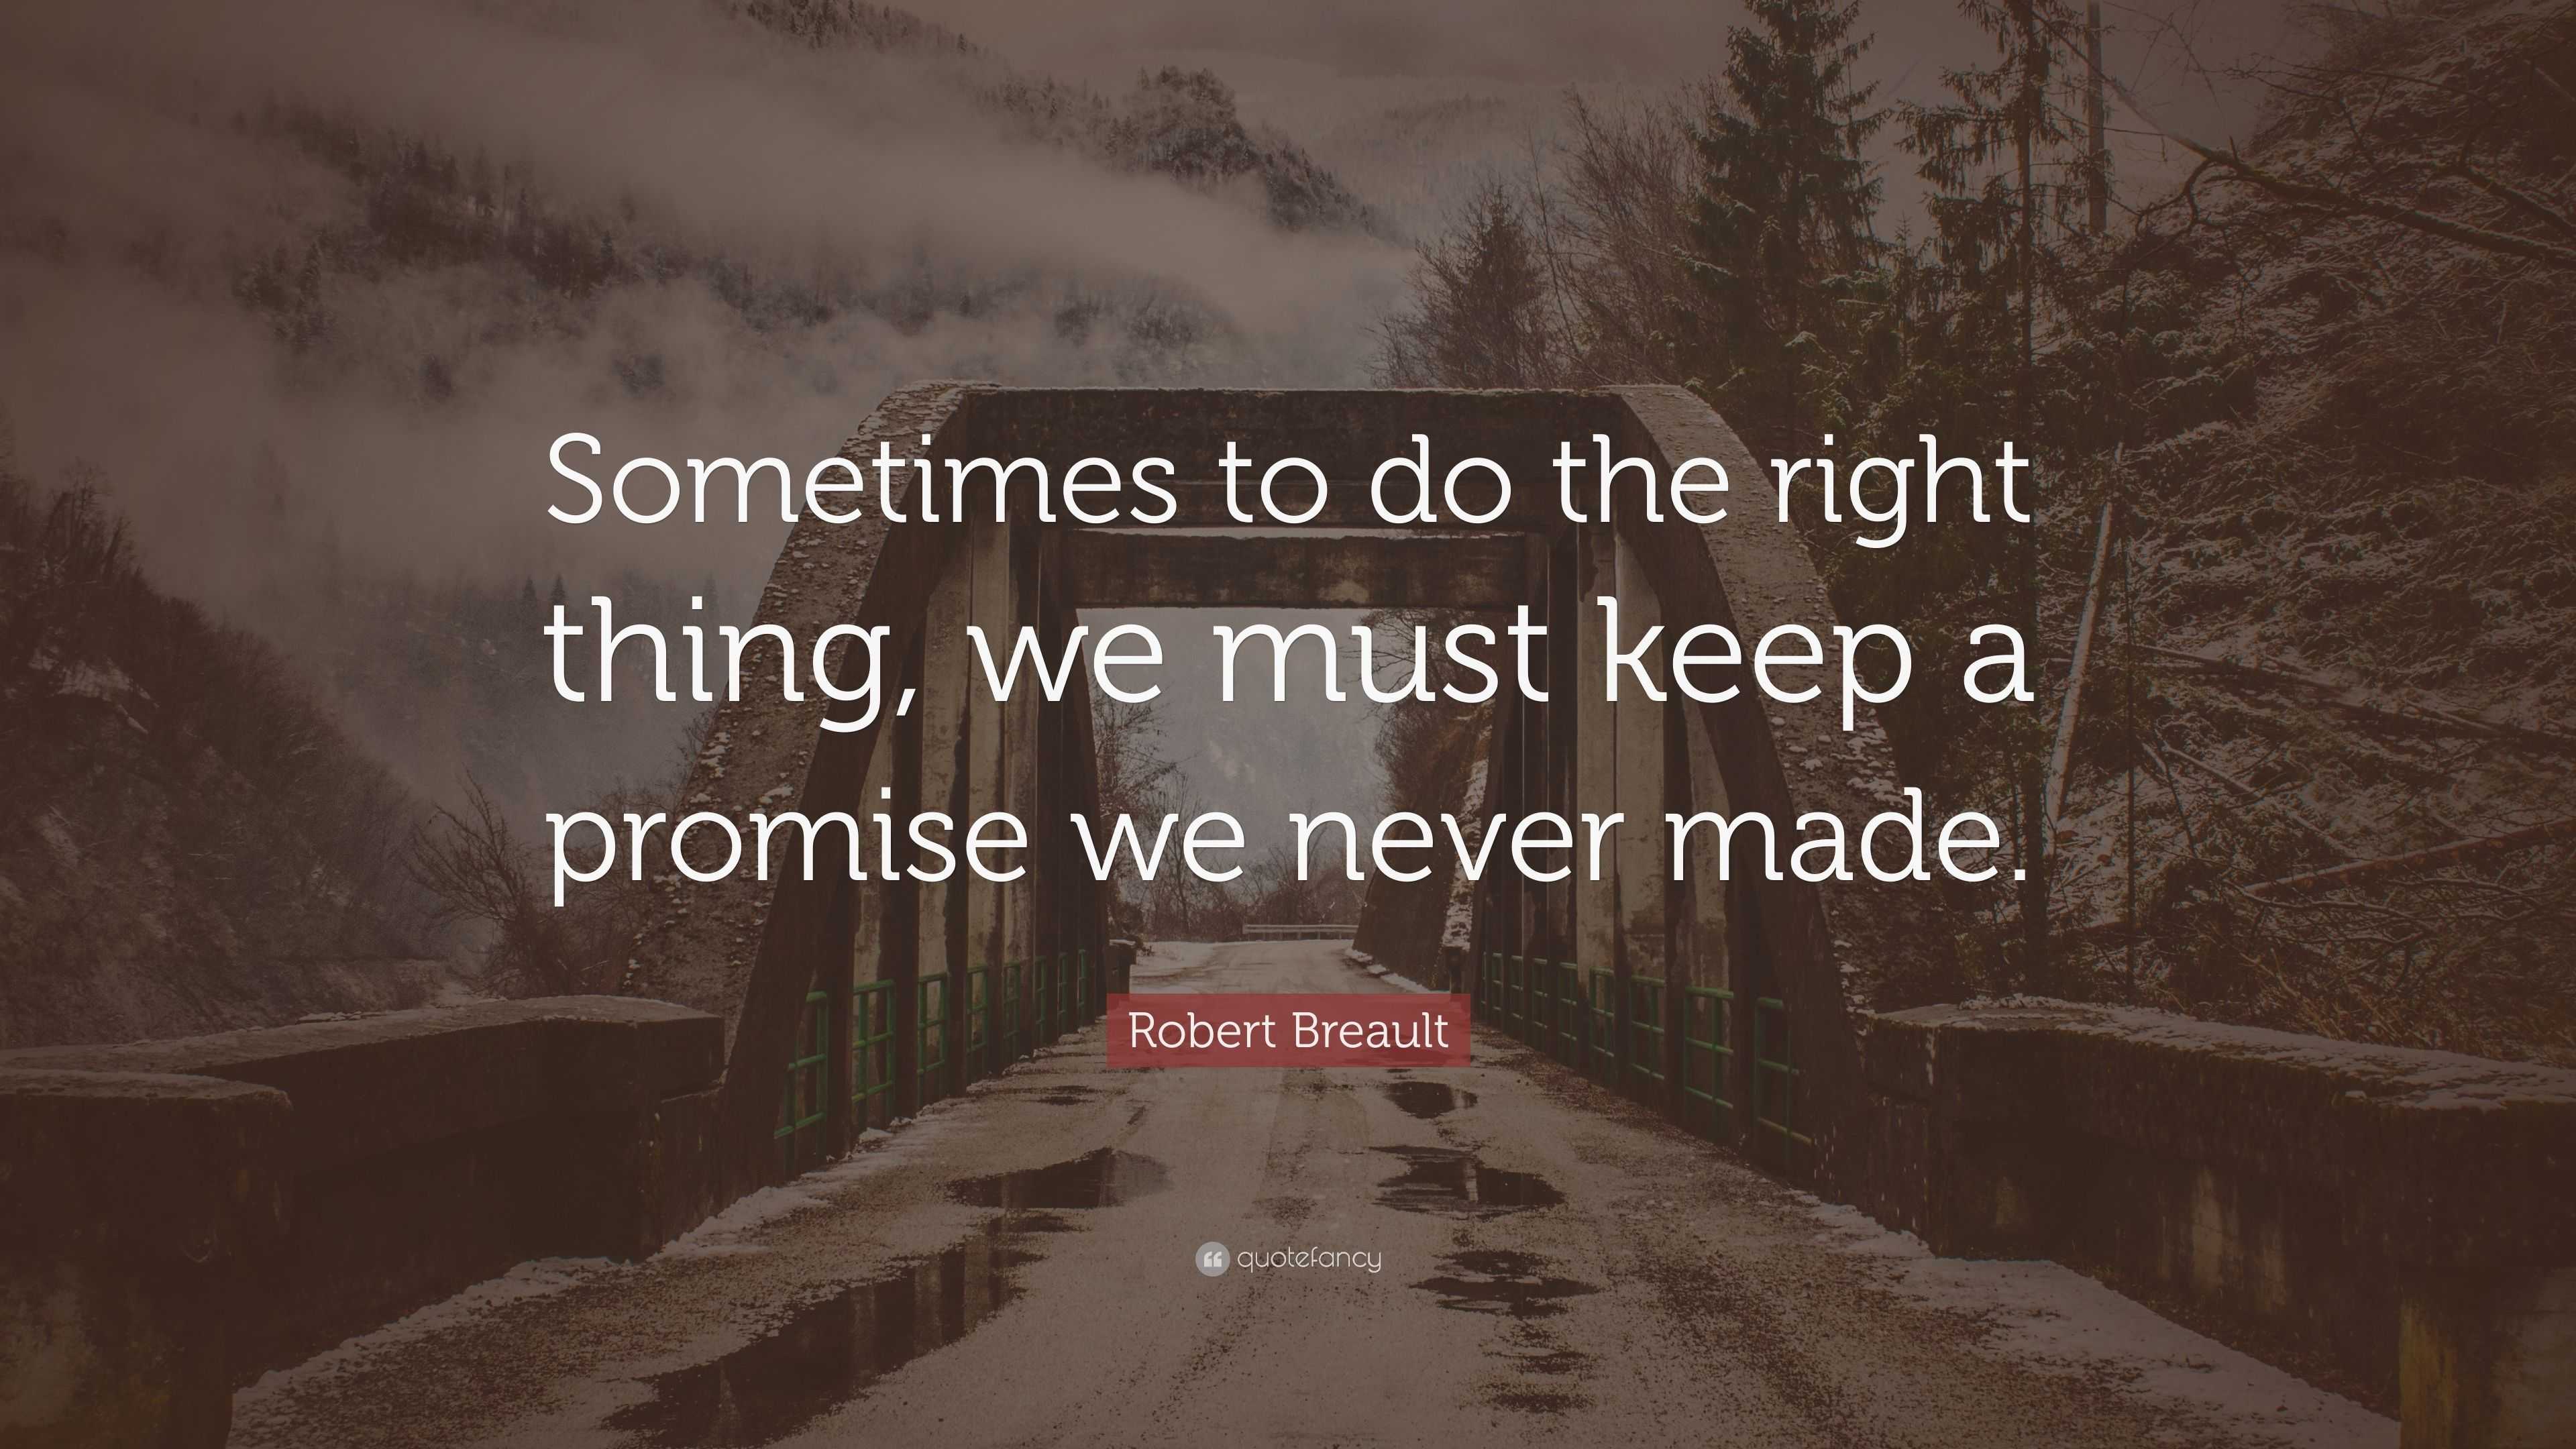 Robert Breault Quote: “Sometimes to do the right thing, we must keep a ...